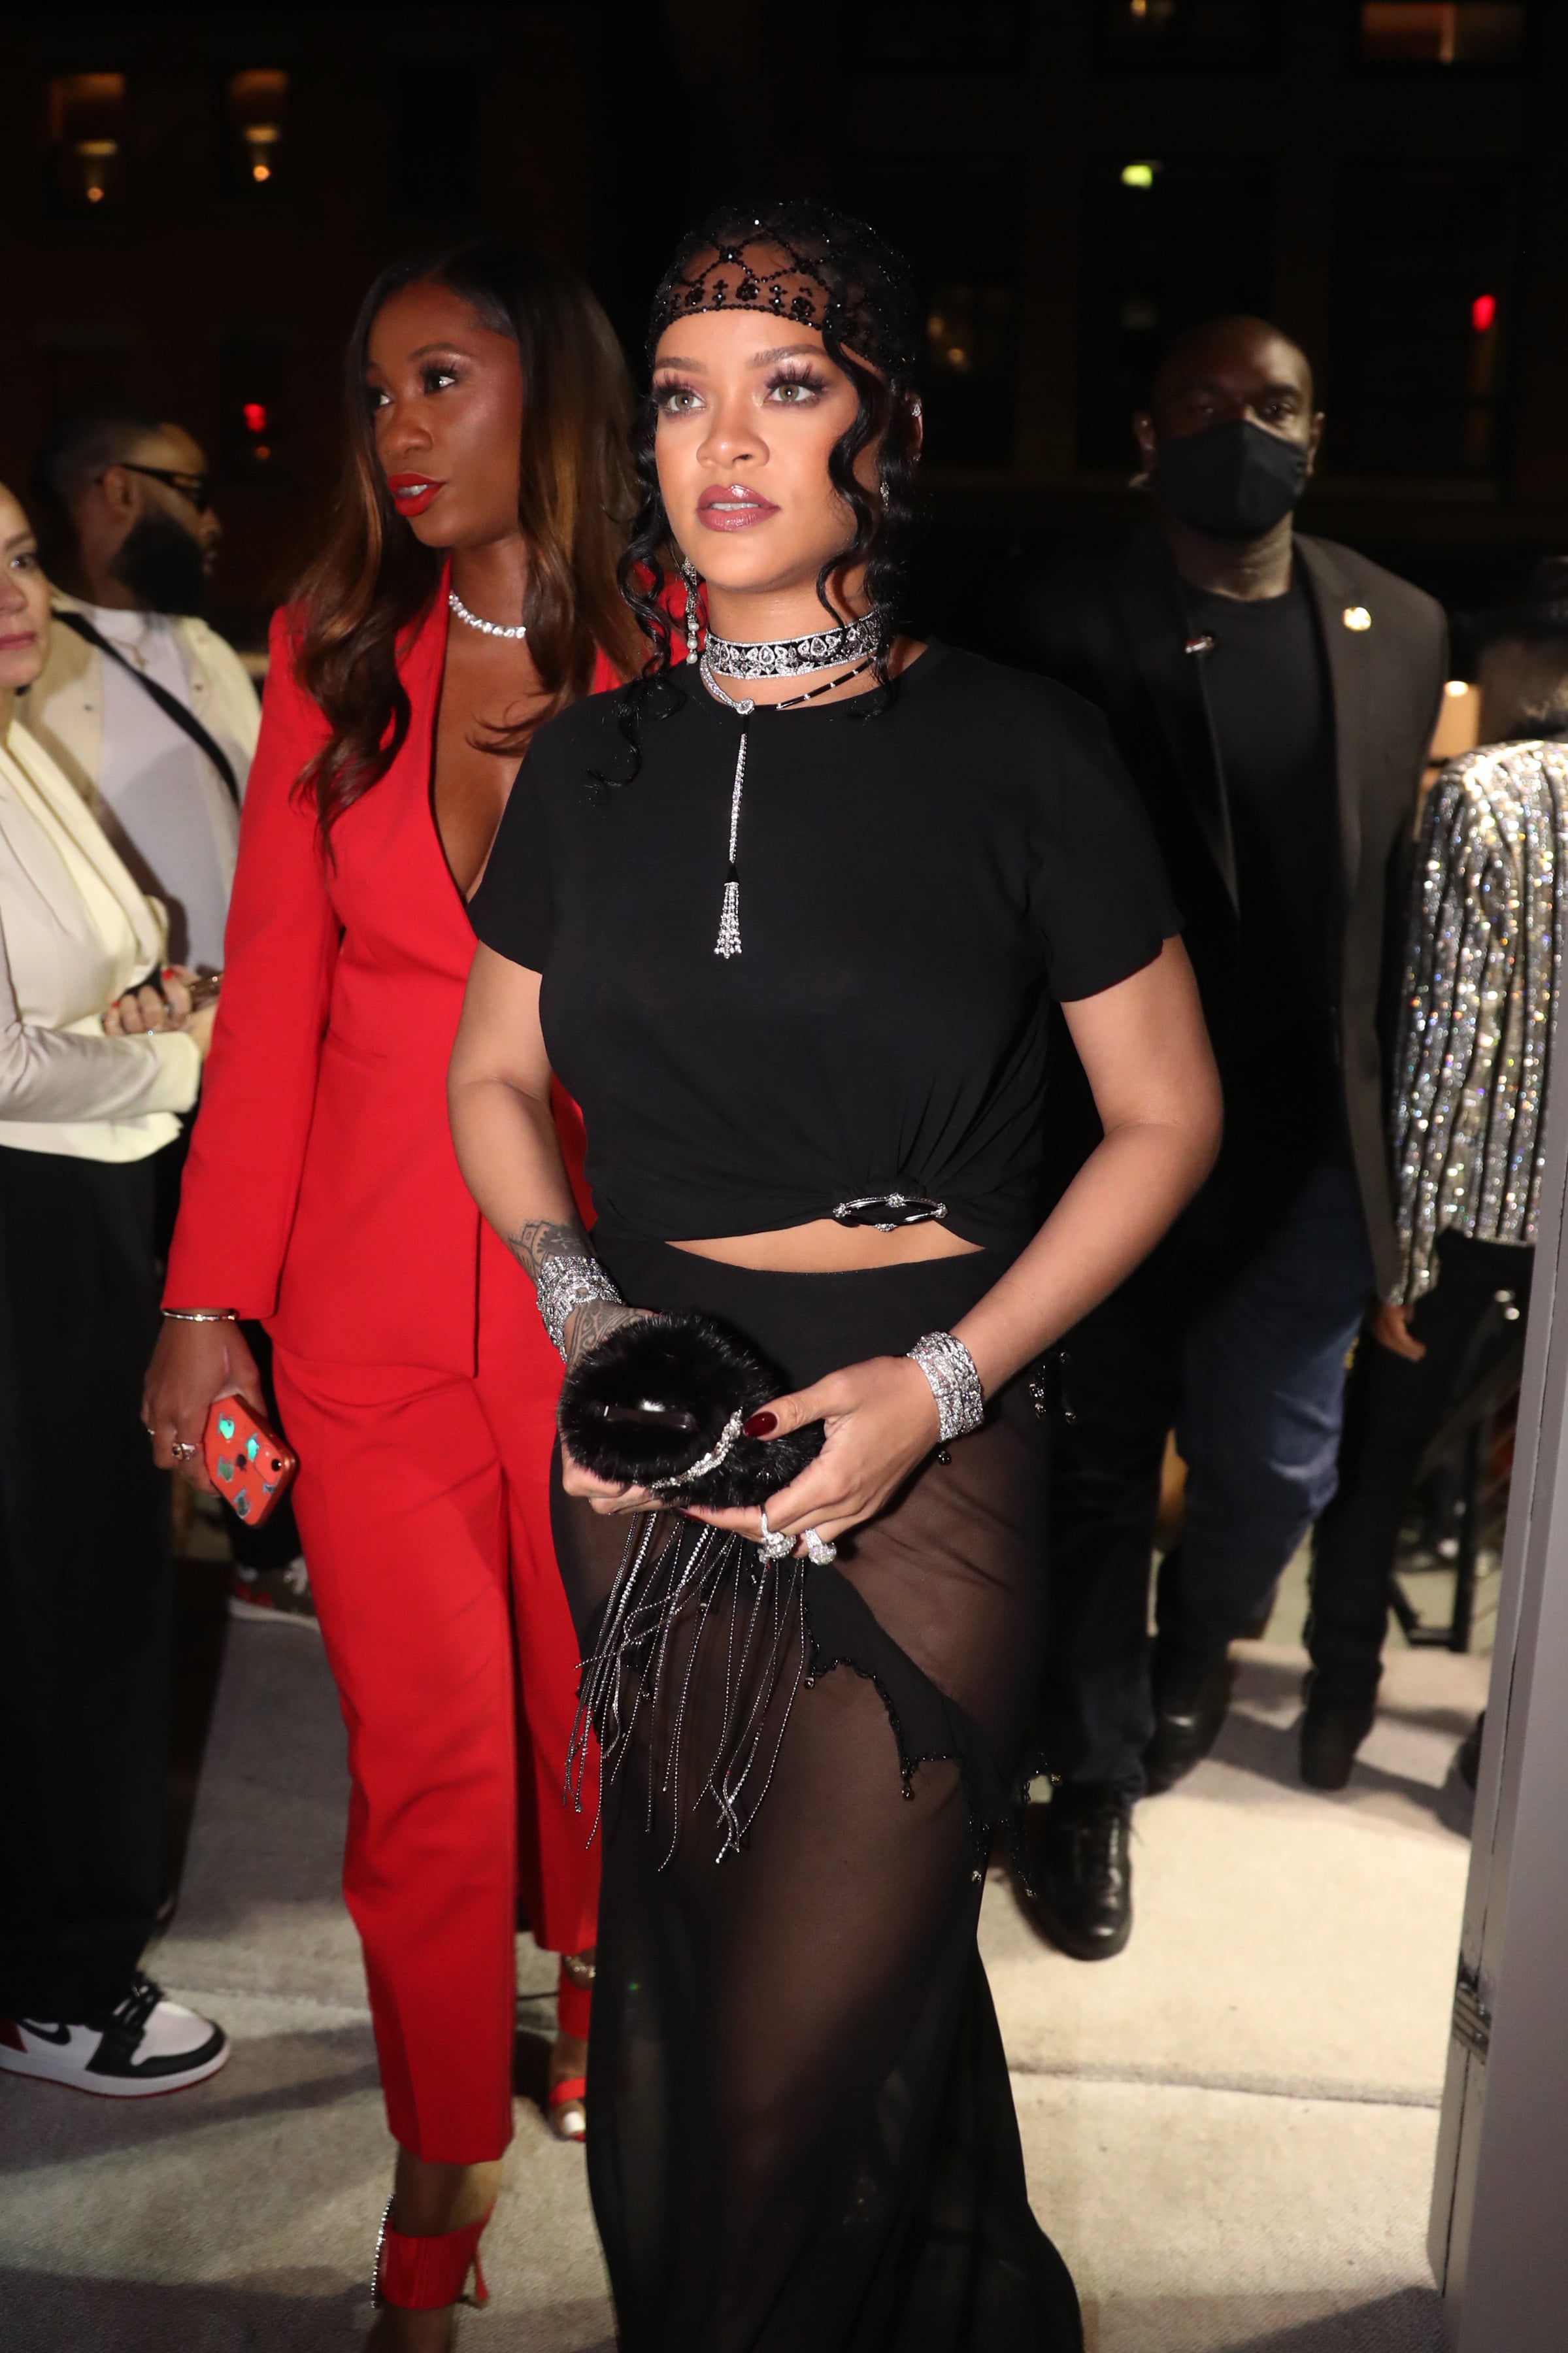 Rihanna Dares to Bare in Ultra-Sheer Met Gala After-Party Look